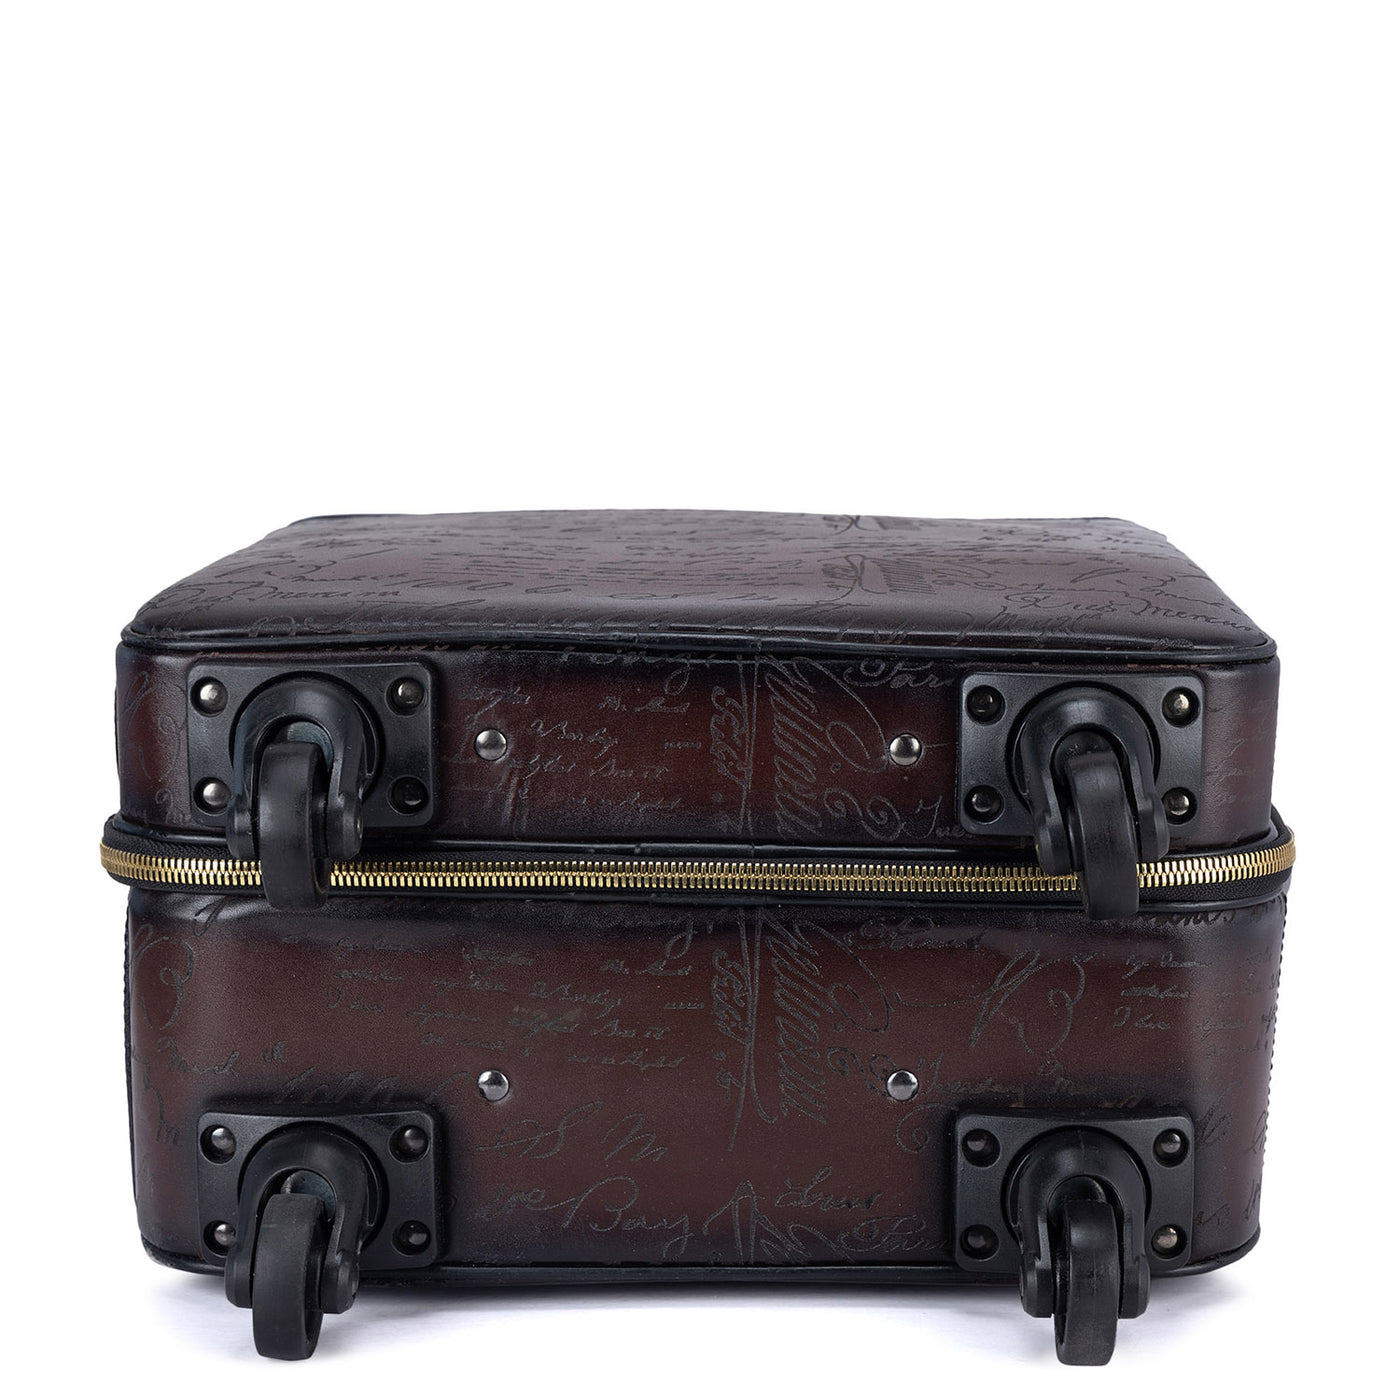 Signato Leather Trolley - Berry